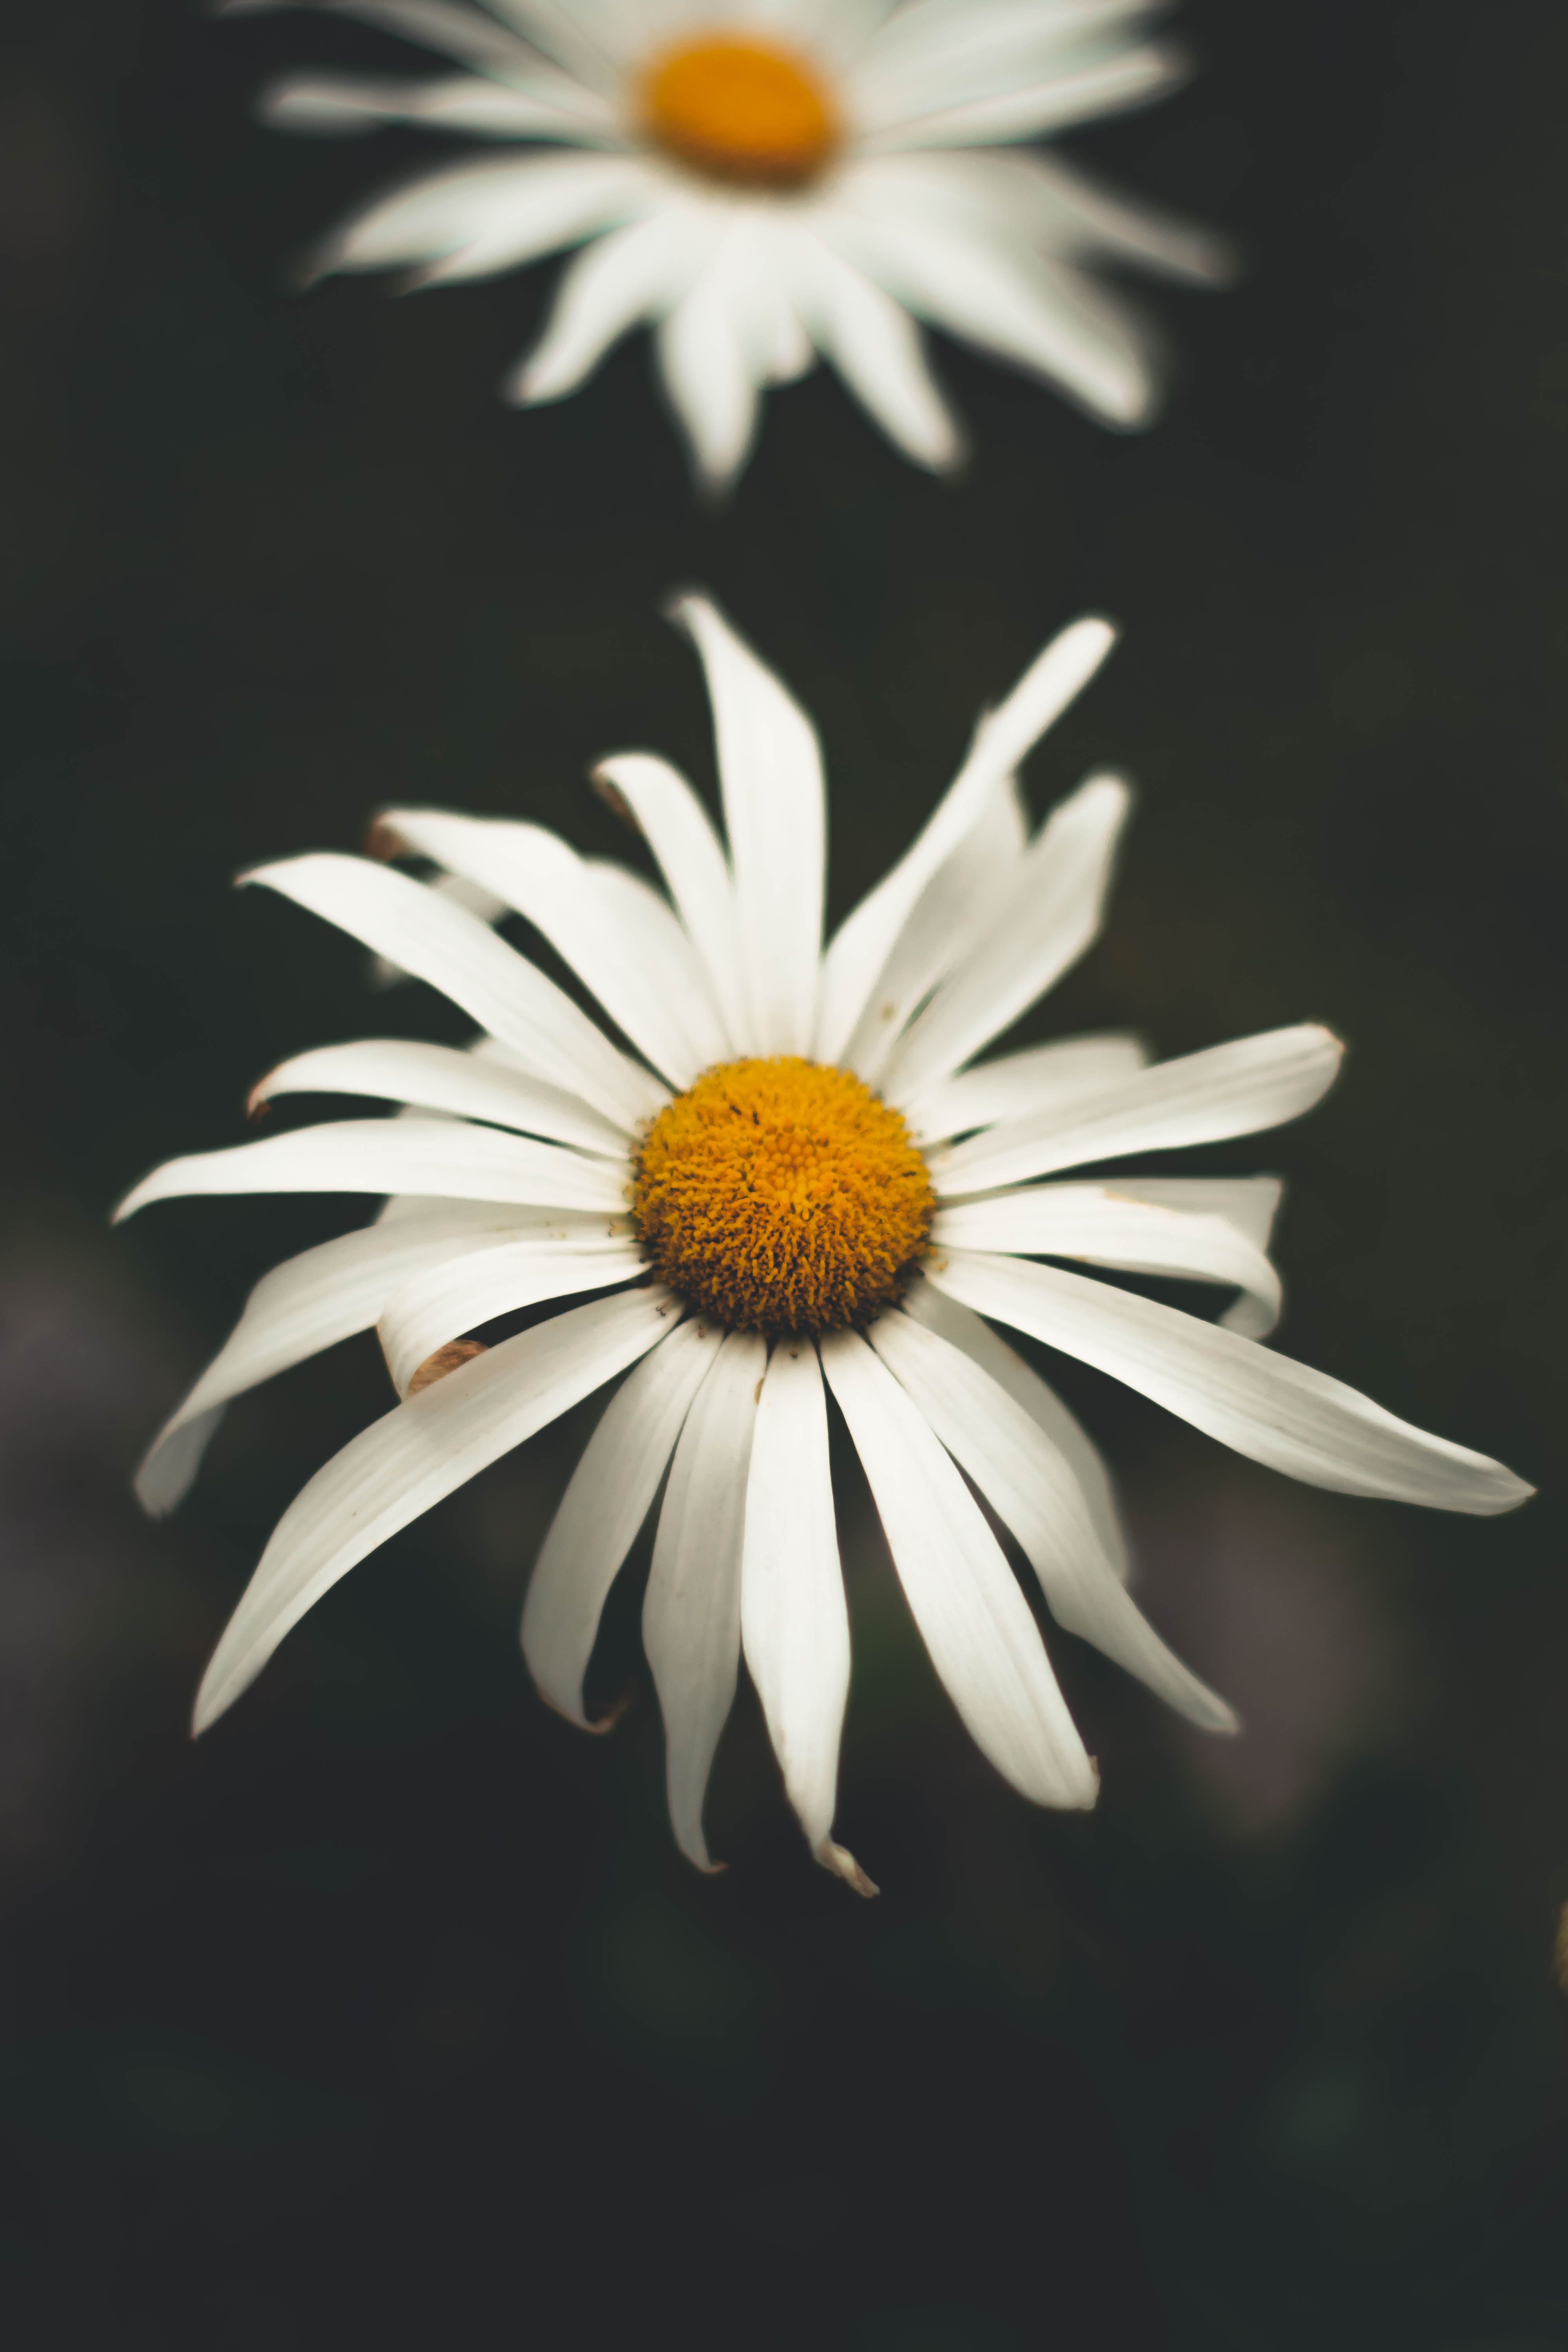 A close-up of two white daisies with yellow centers. - Daisy